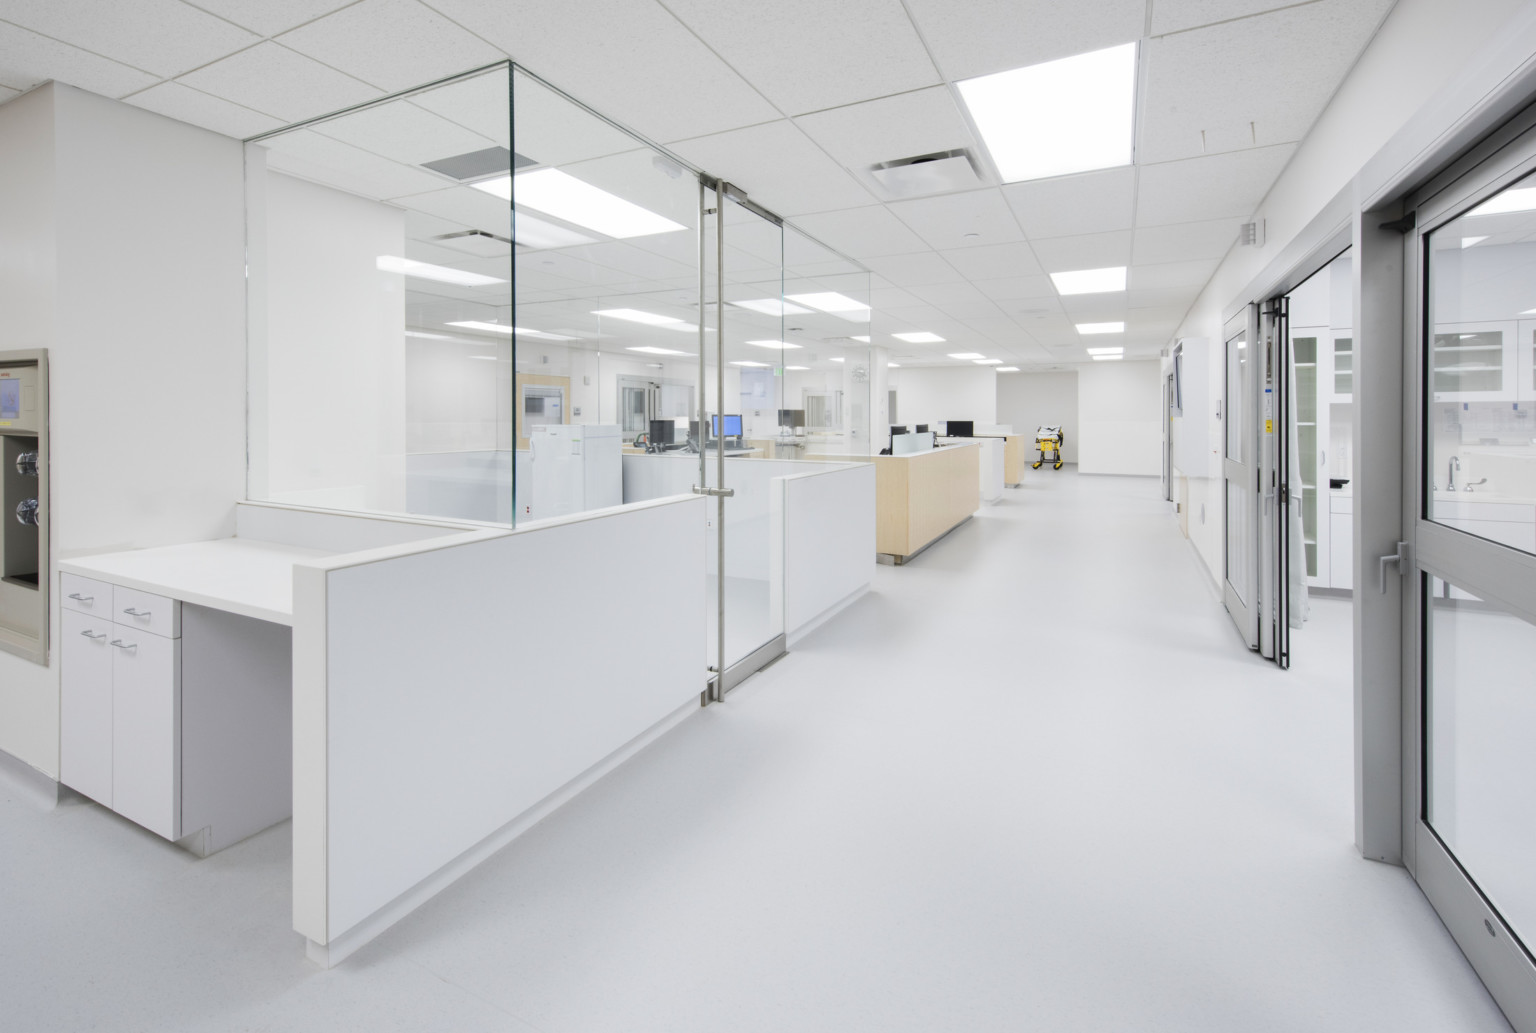 Bright white emergency room nurses stations opposite patient rooms have glass walls for visibility